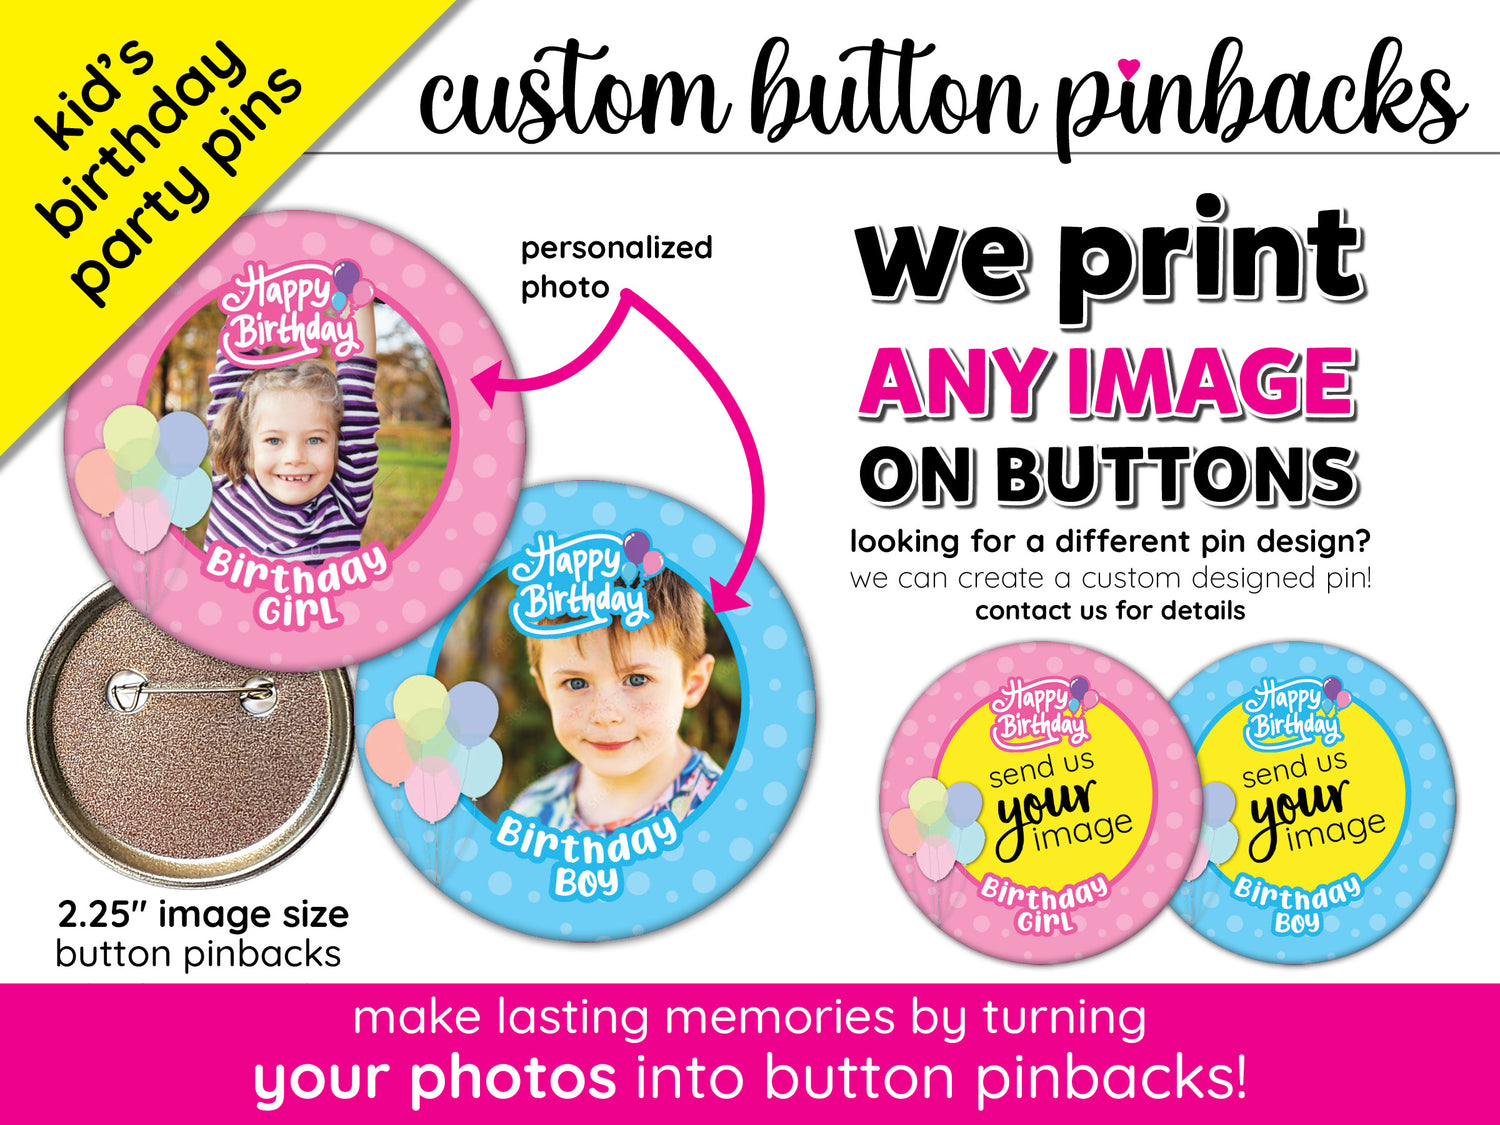 kid's birthday party custom photo pin back buttons